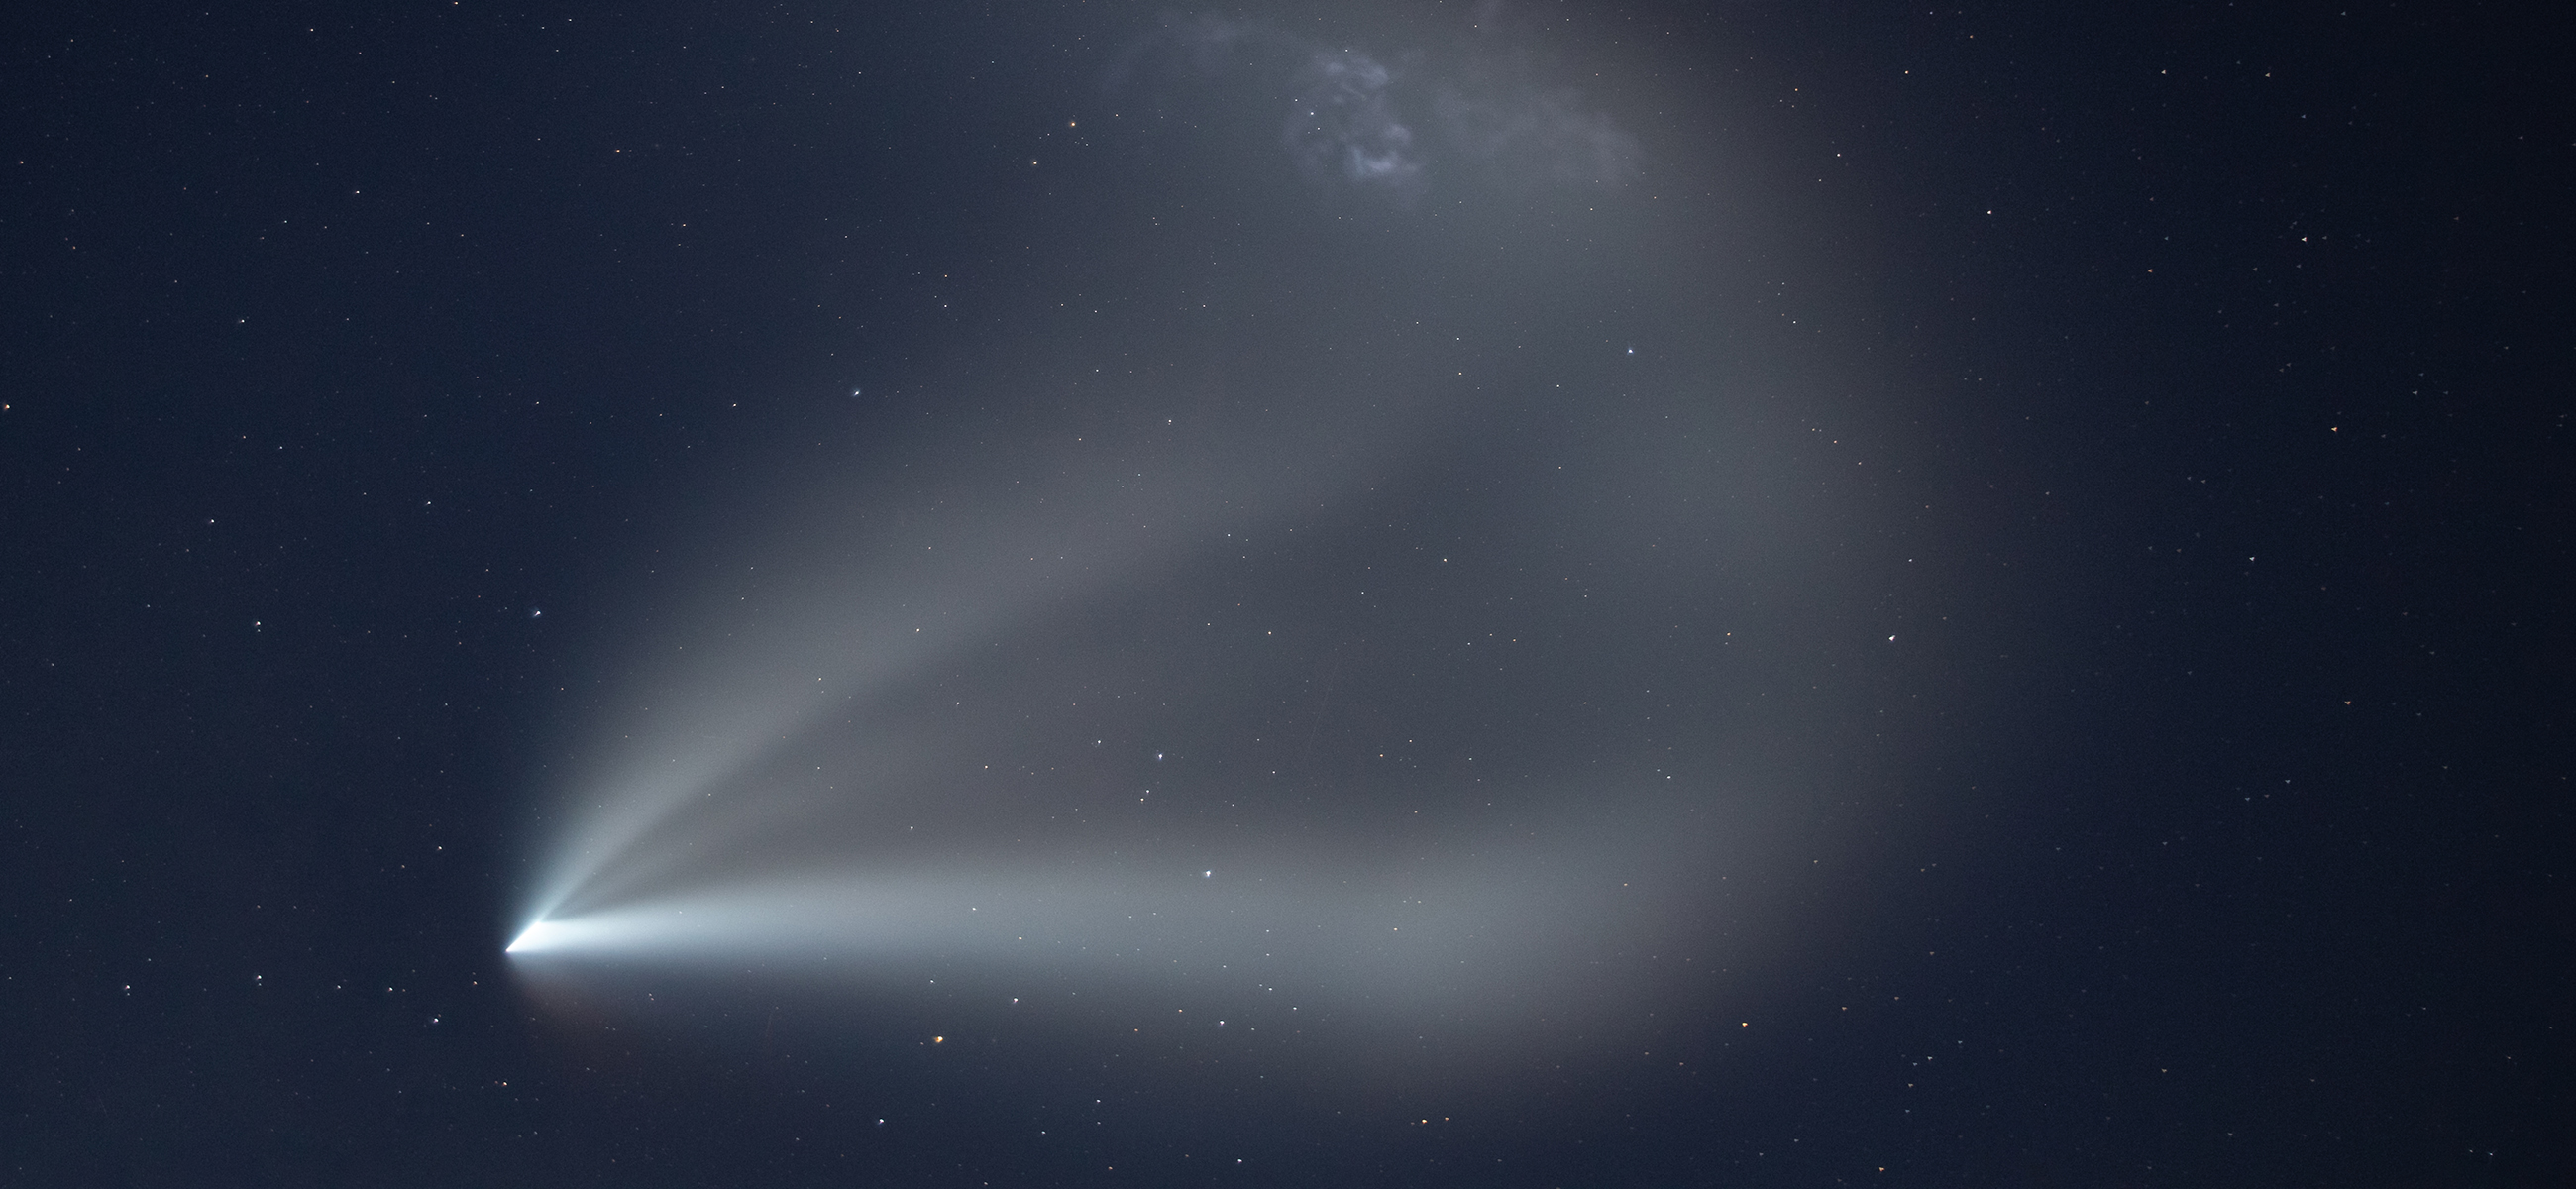 An aurora of white spread out from a pinpoint in the sky like mist from a hose, highlighting the rocket's expanding plume as it climbs the atmosphere against a dark, starry night sky.